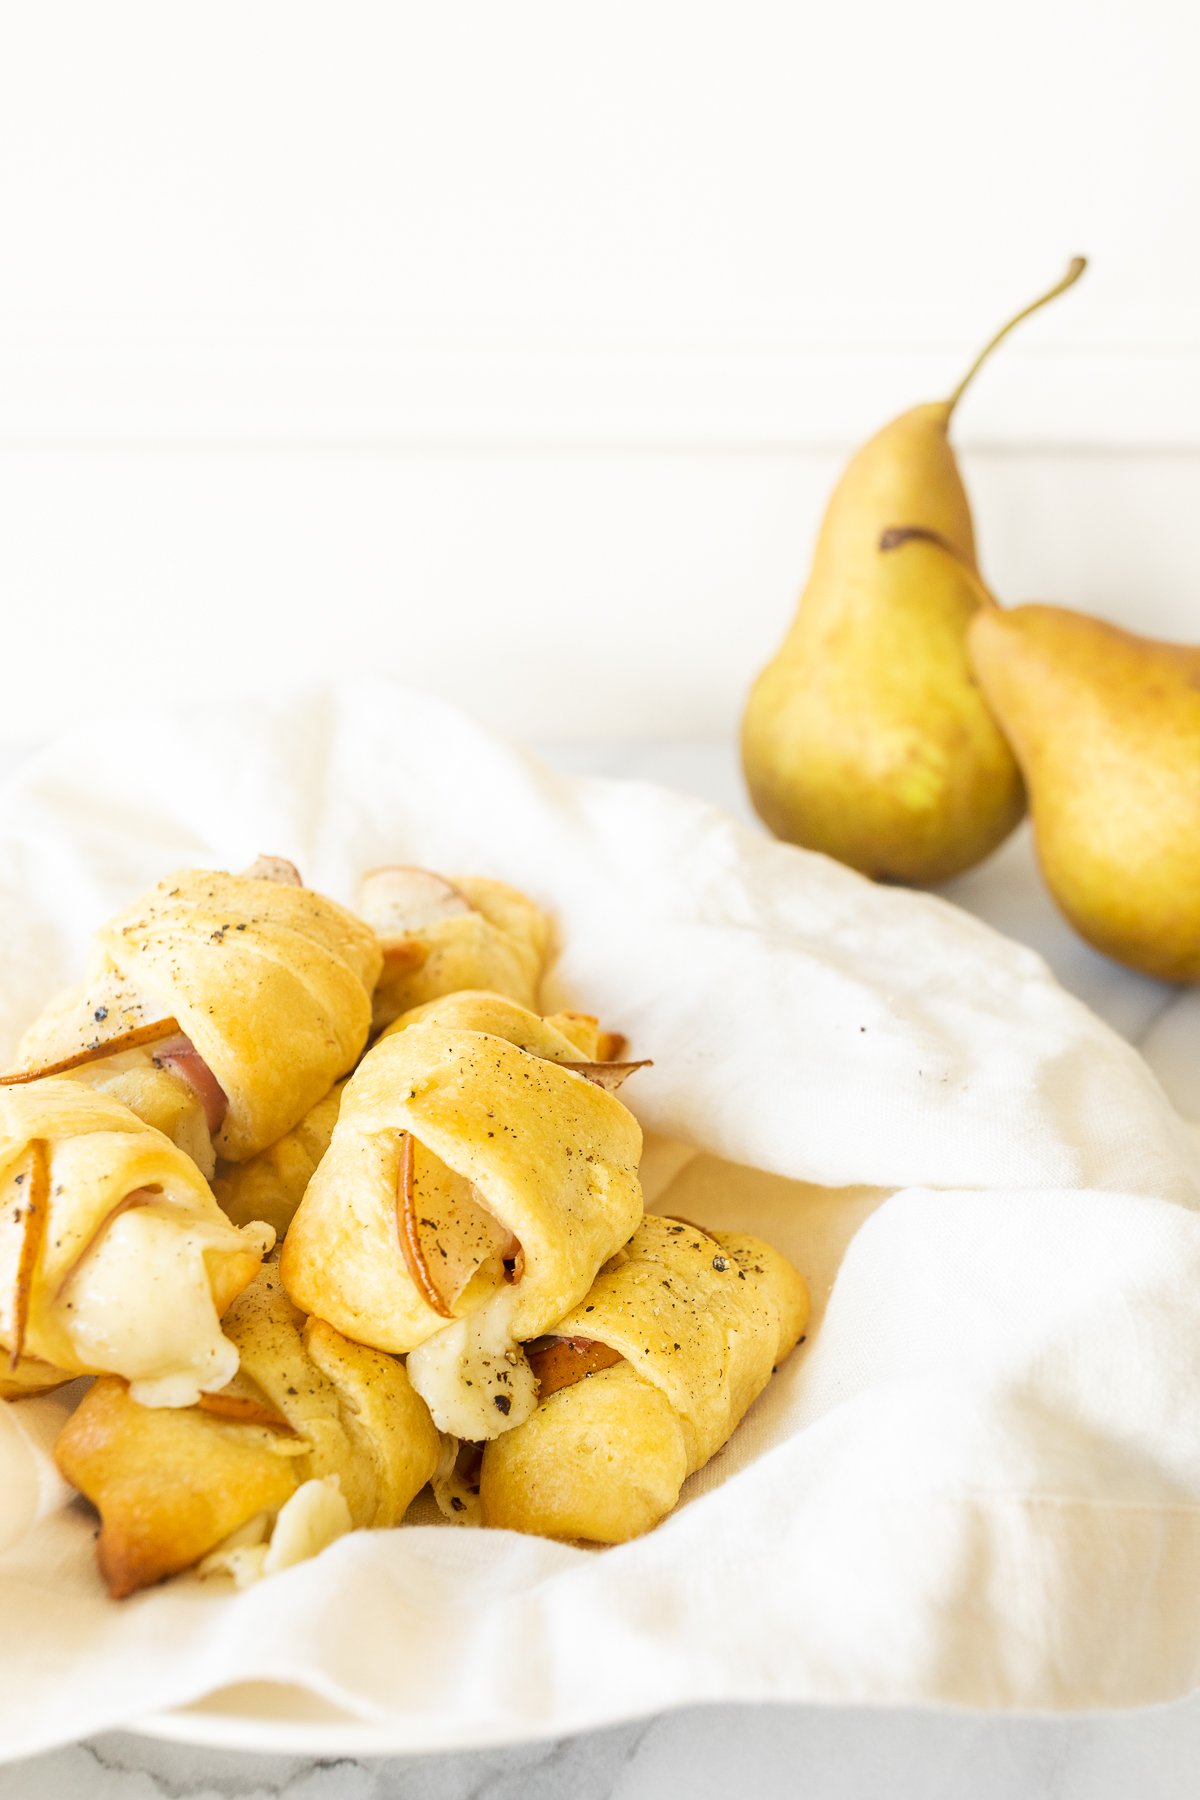 A plate with pears, a napkin, and crescent roll appetizers next to it.